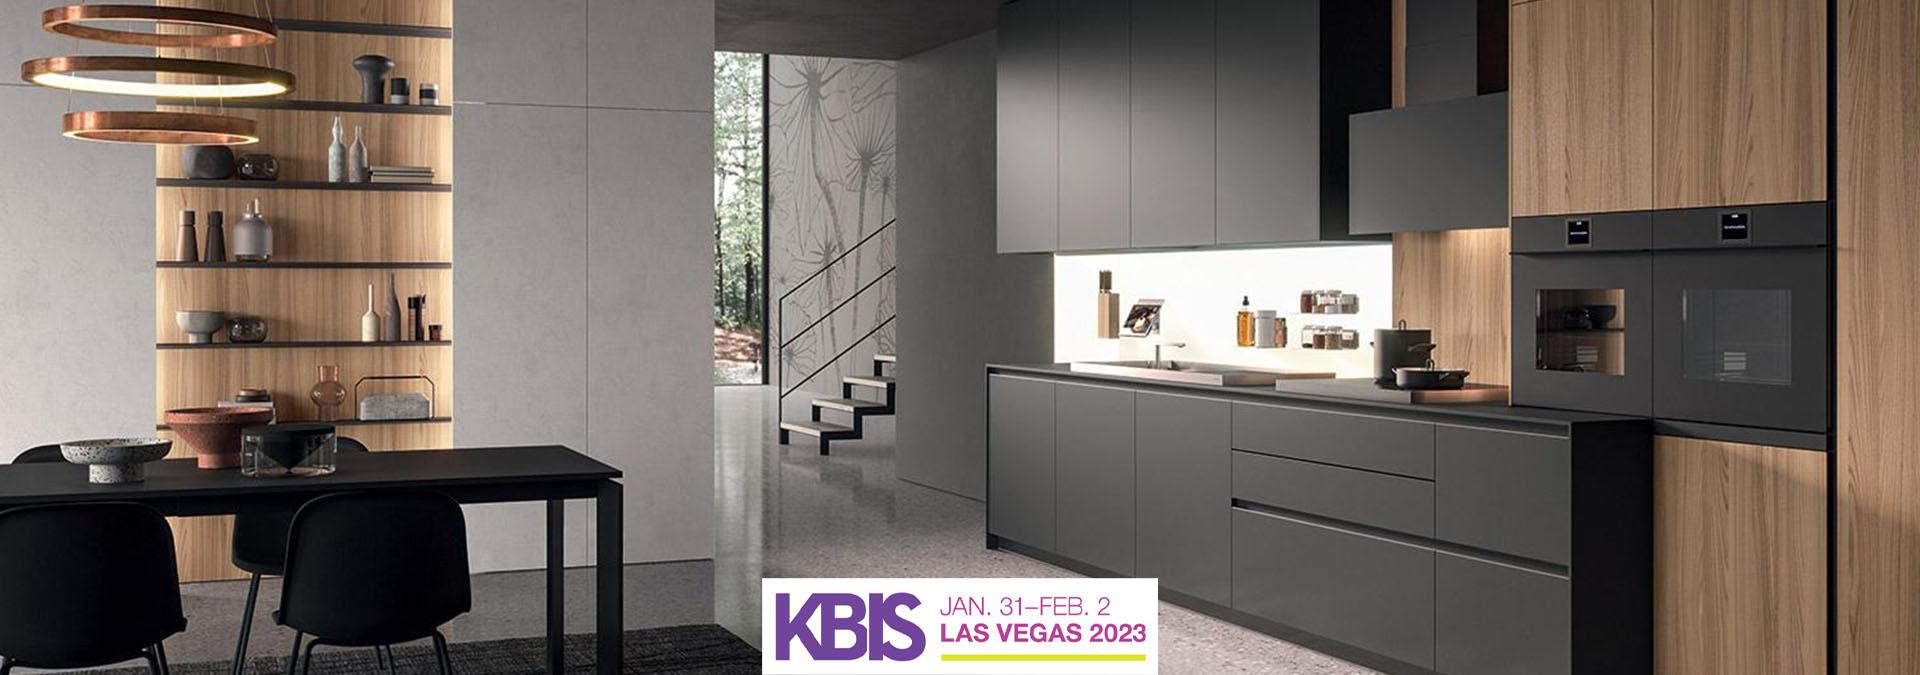 ASTRA CUCINE WILL BE PRESENT AT KBIS 2023